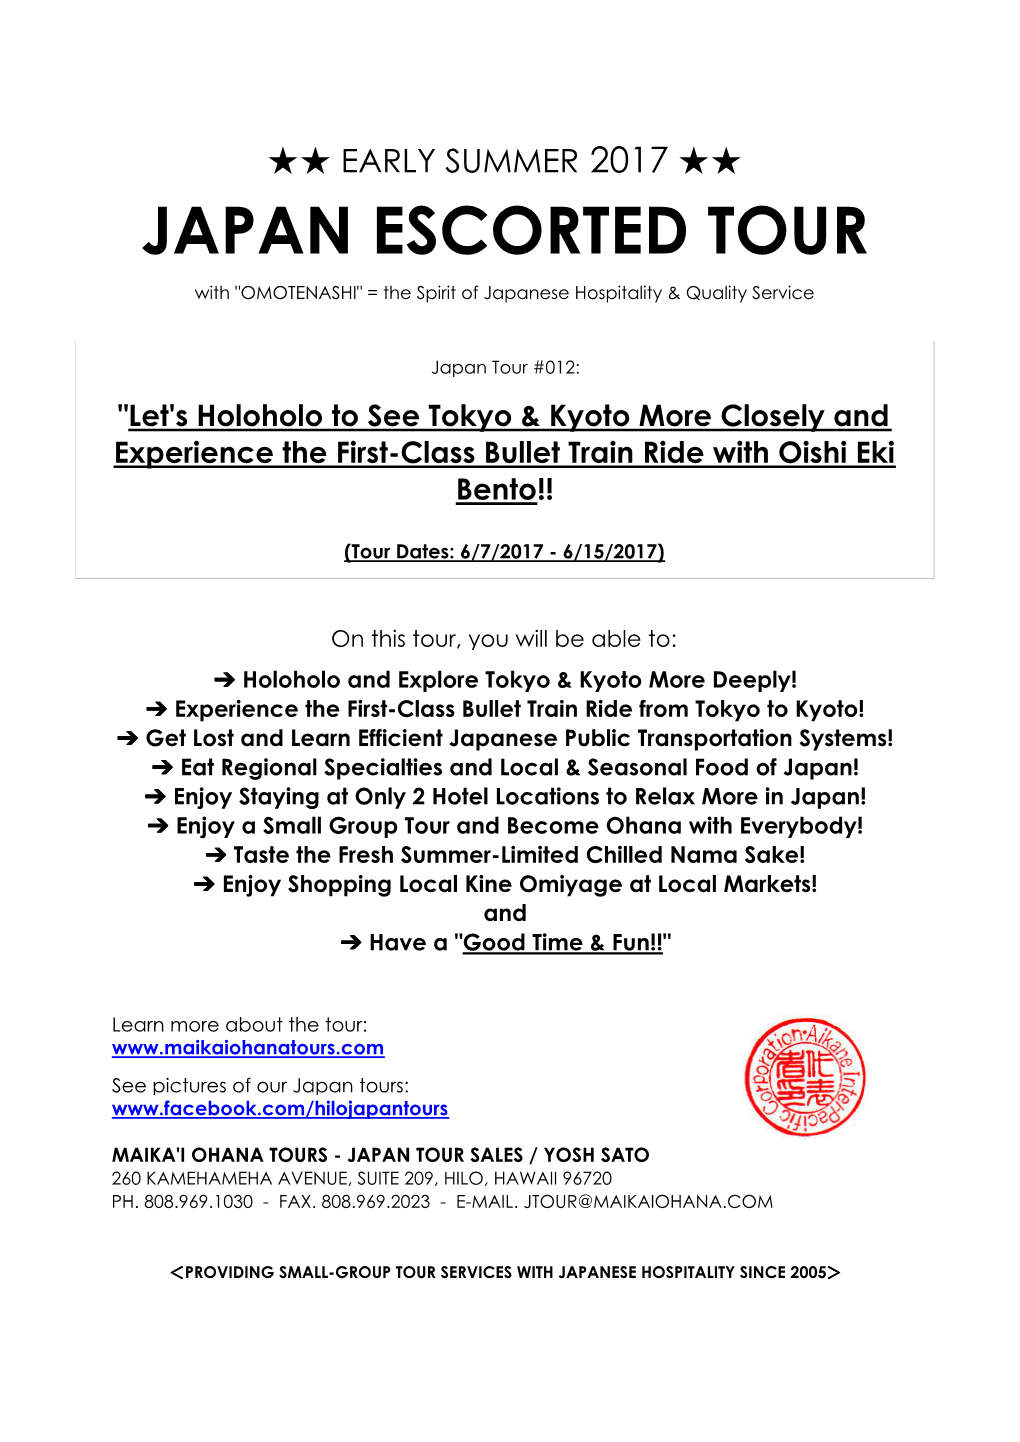 Full-Tour-Itinerary-For-Japan-Tour-In-Early-Summer-2017-1.31.2017.Pdf